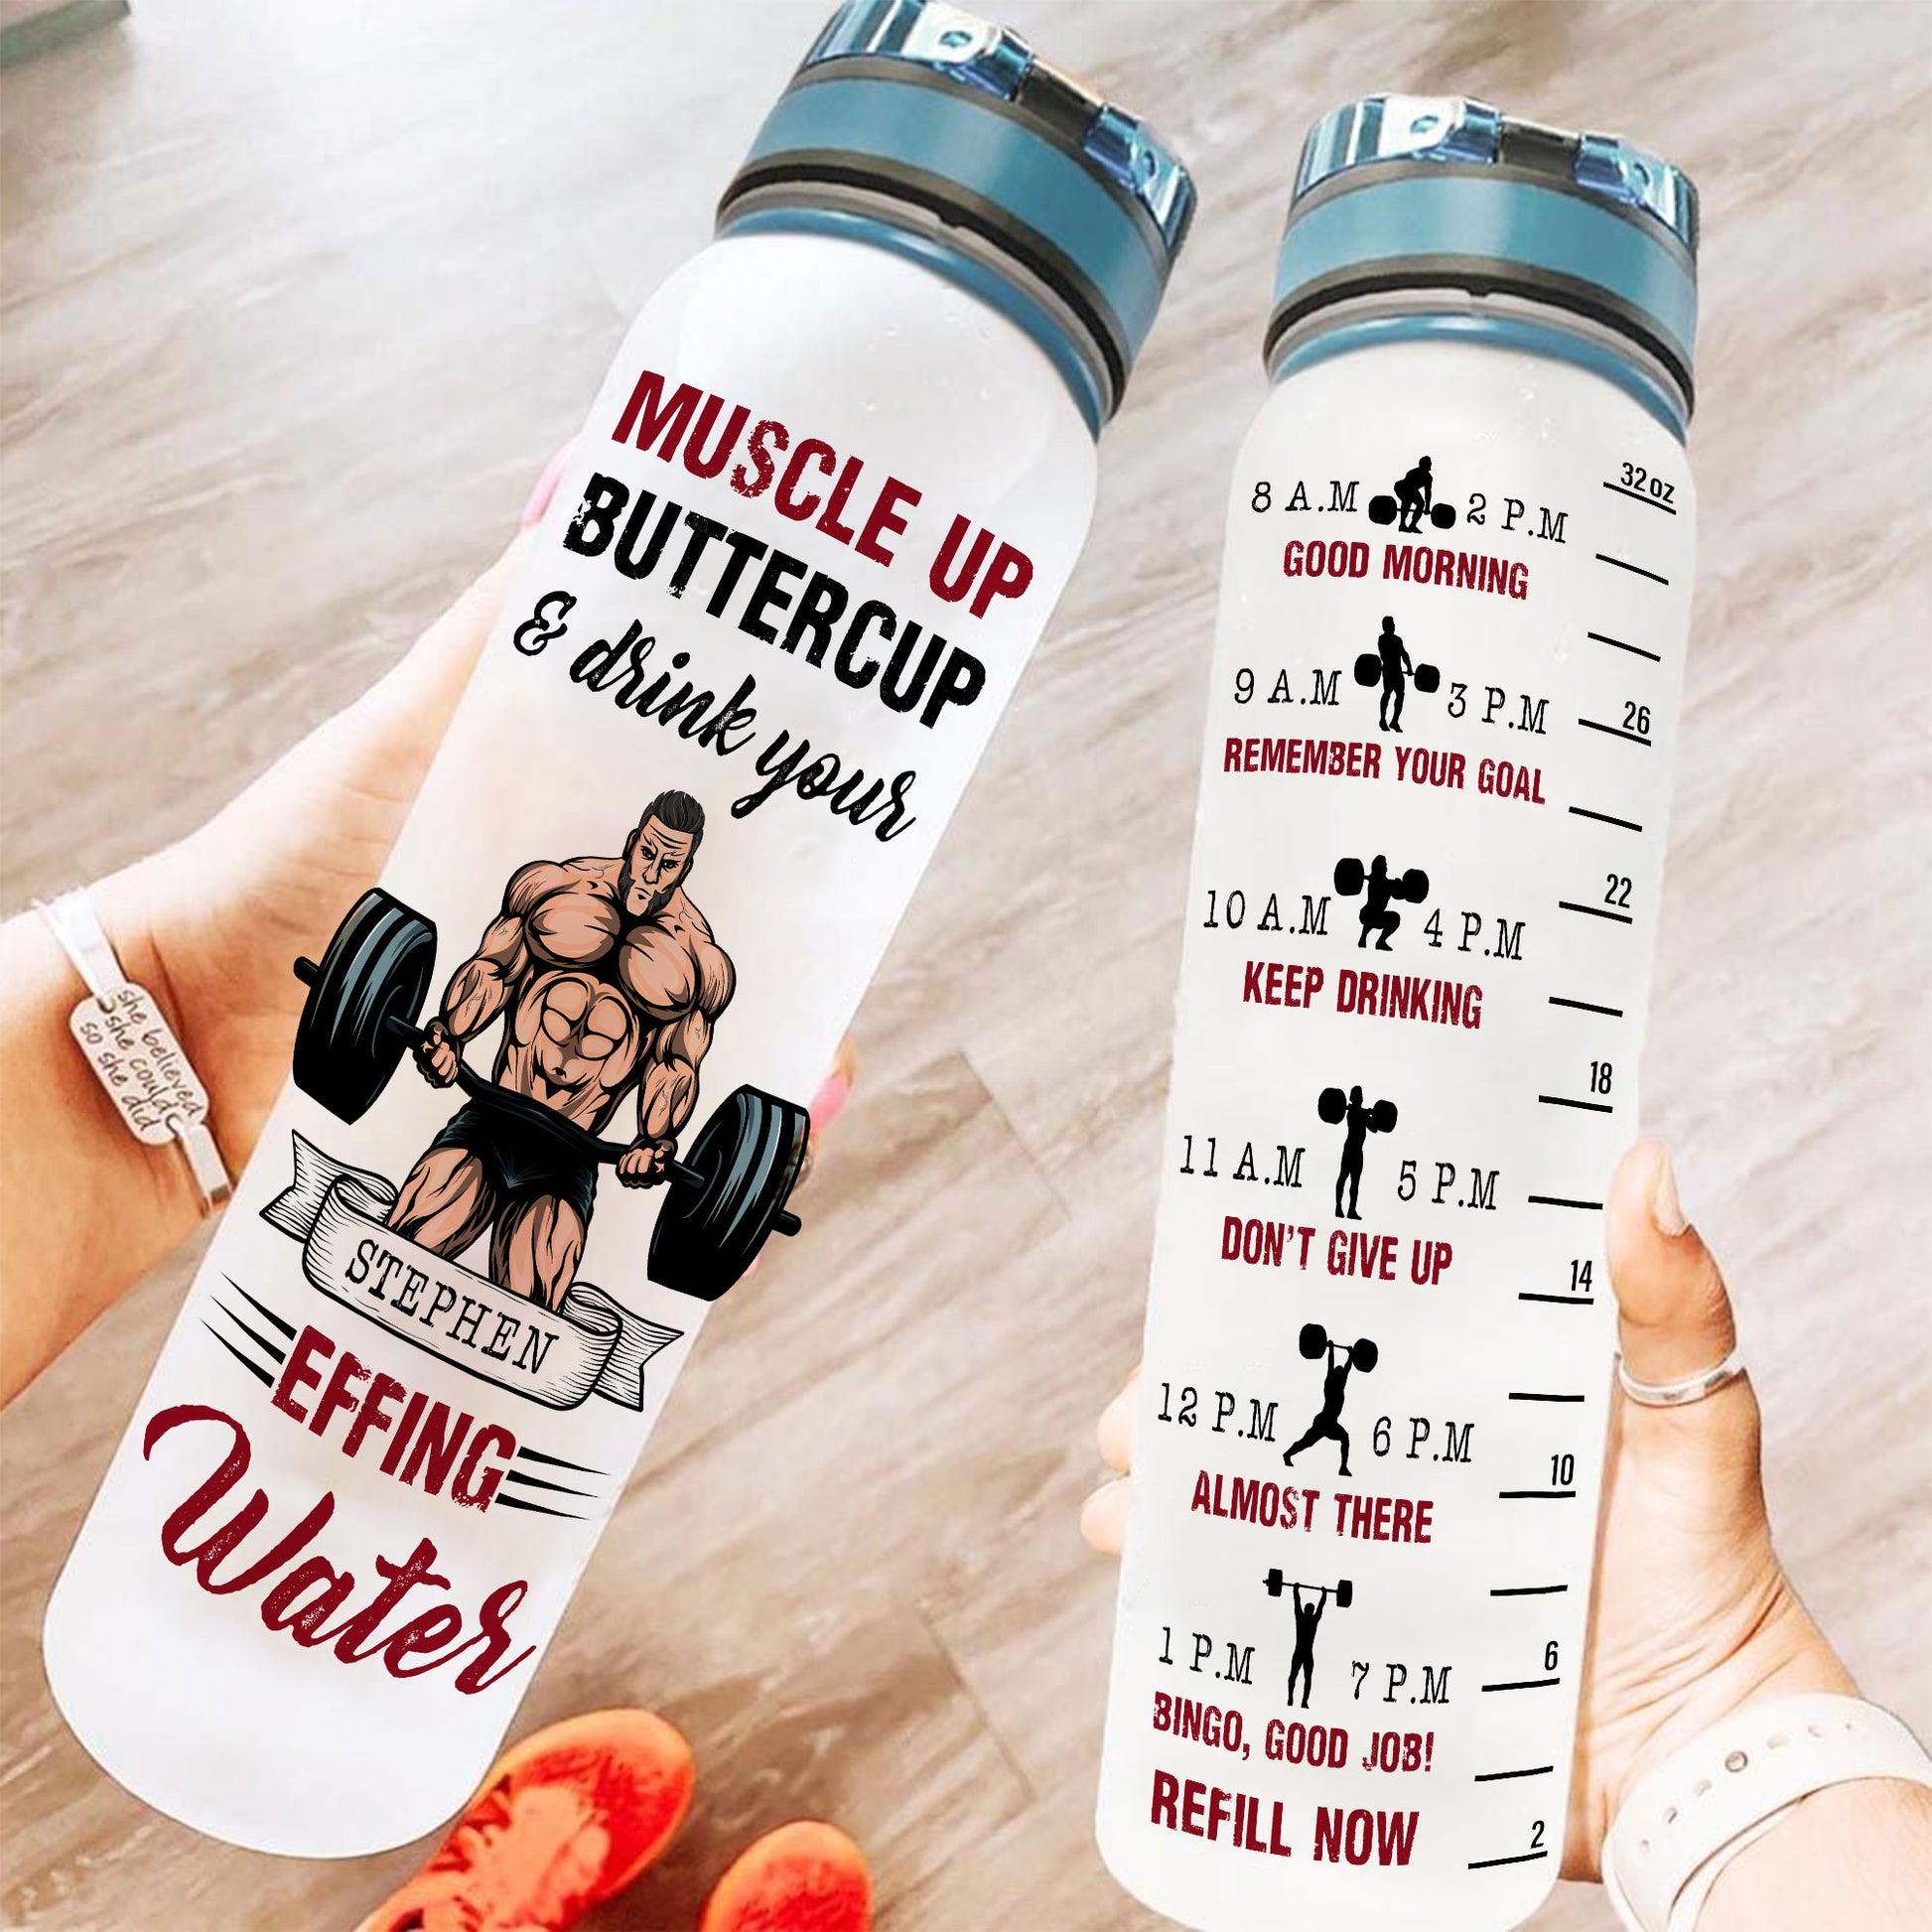 Funny Gym Gifts Men Funny Bodybuilding Fitness Gym' Water Bottle